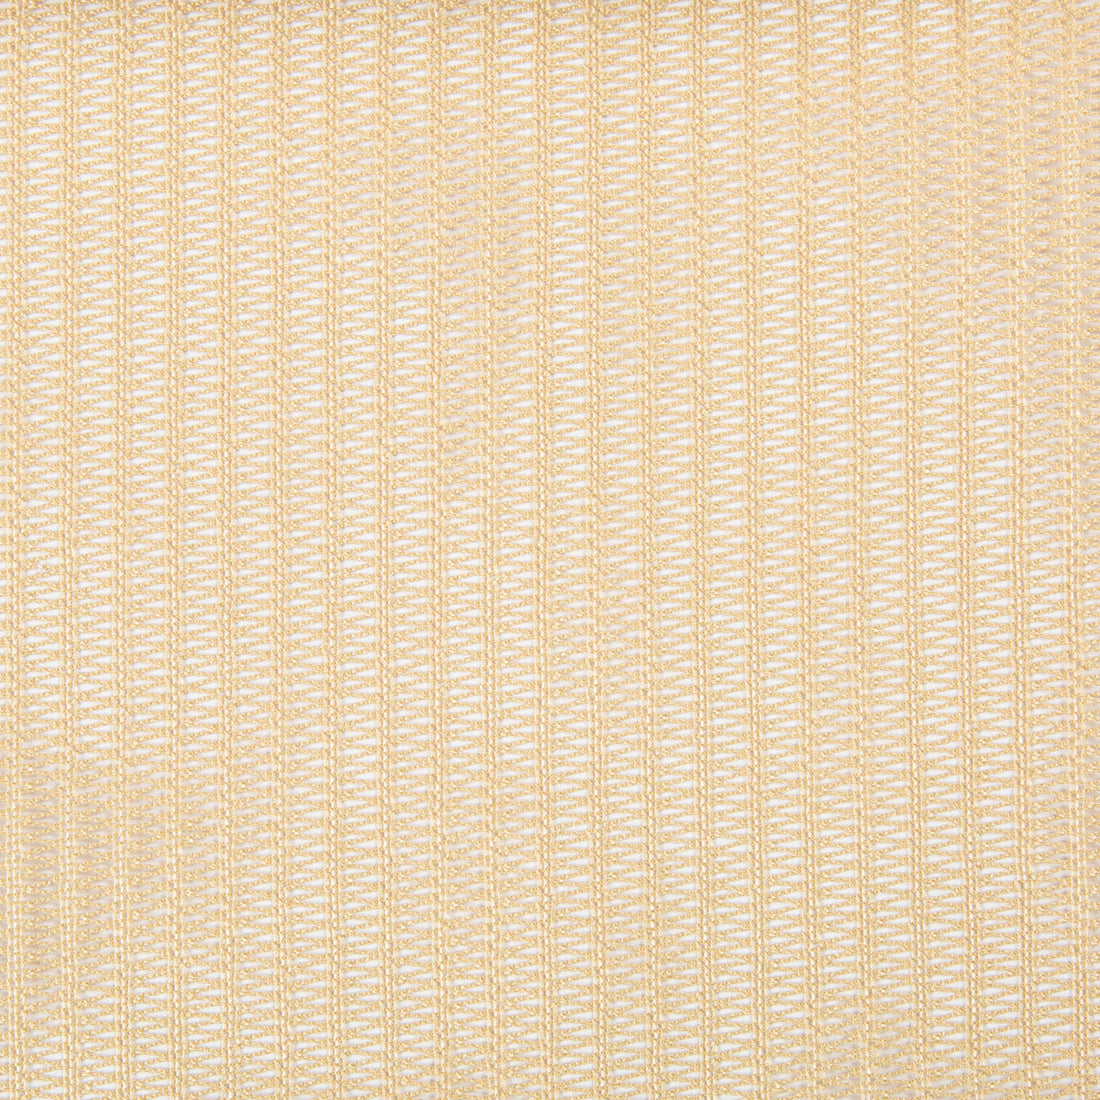 Gish fabric in soft gold color - pattern 4277.16.0 - by Kravet Contract